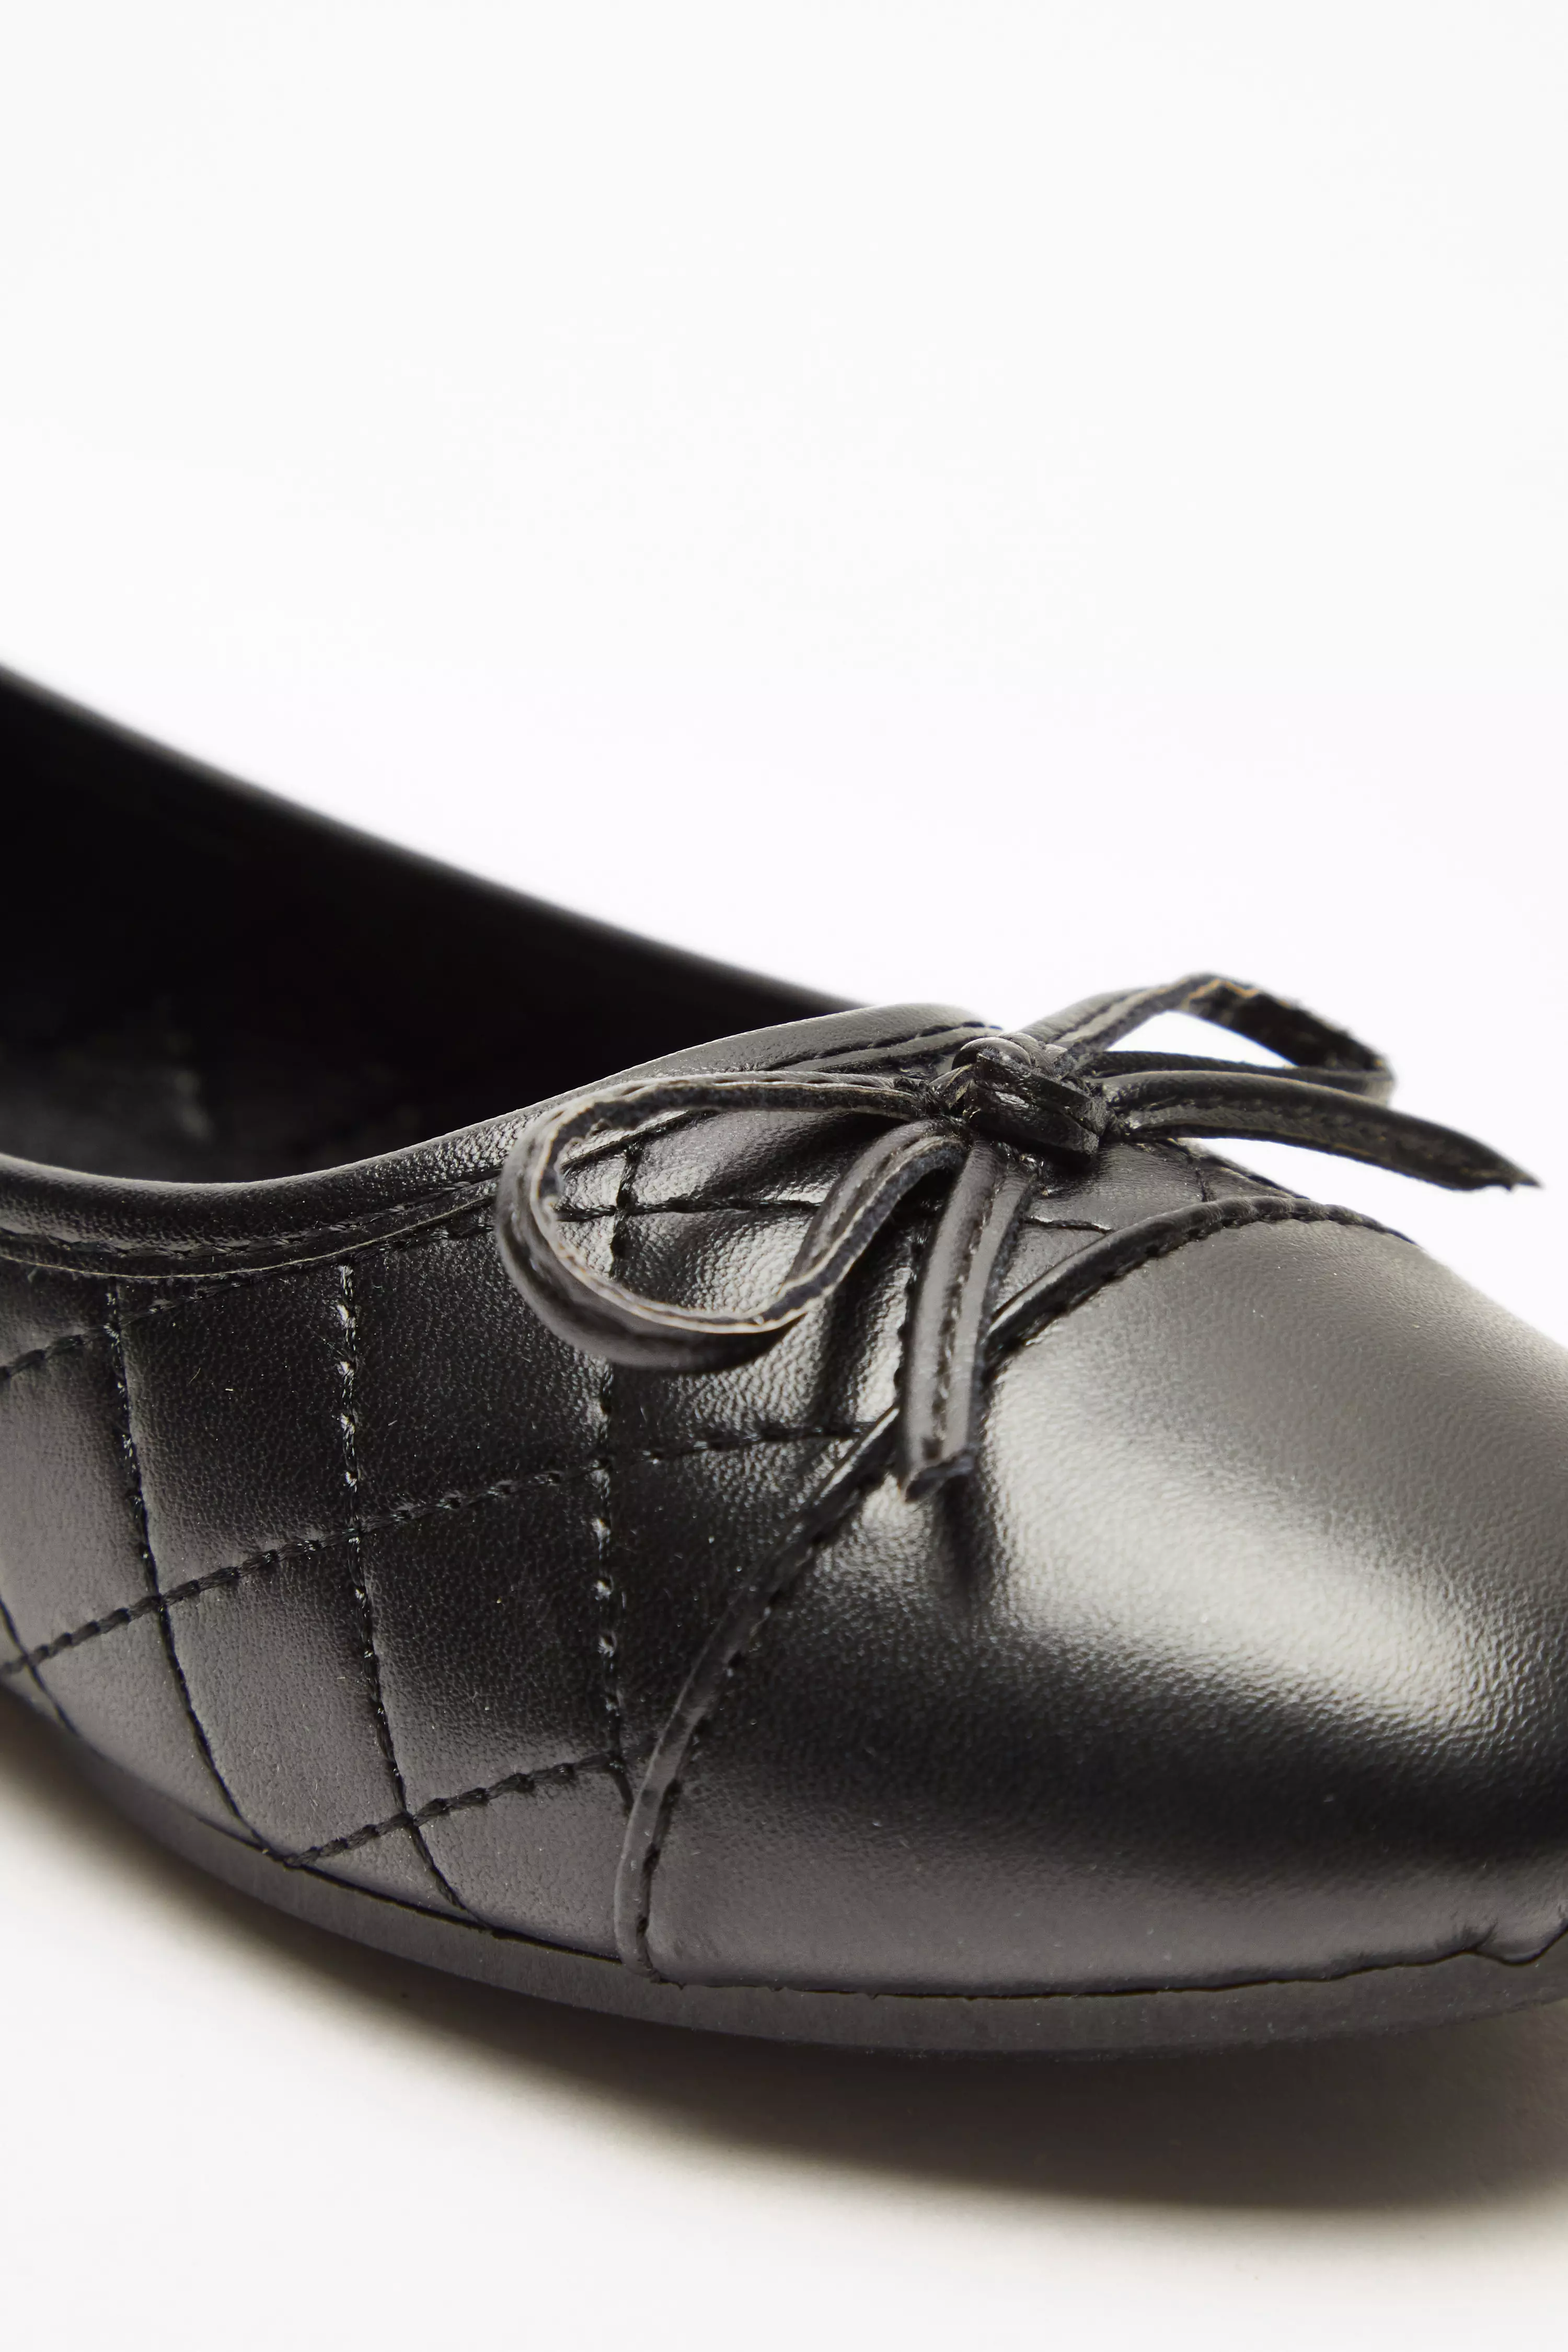 Black Quilted Ballet Flats